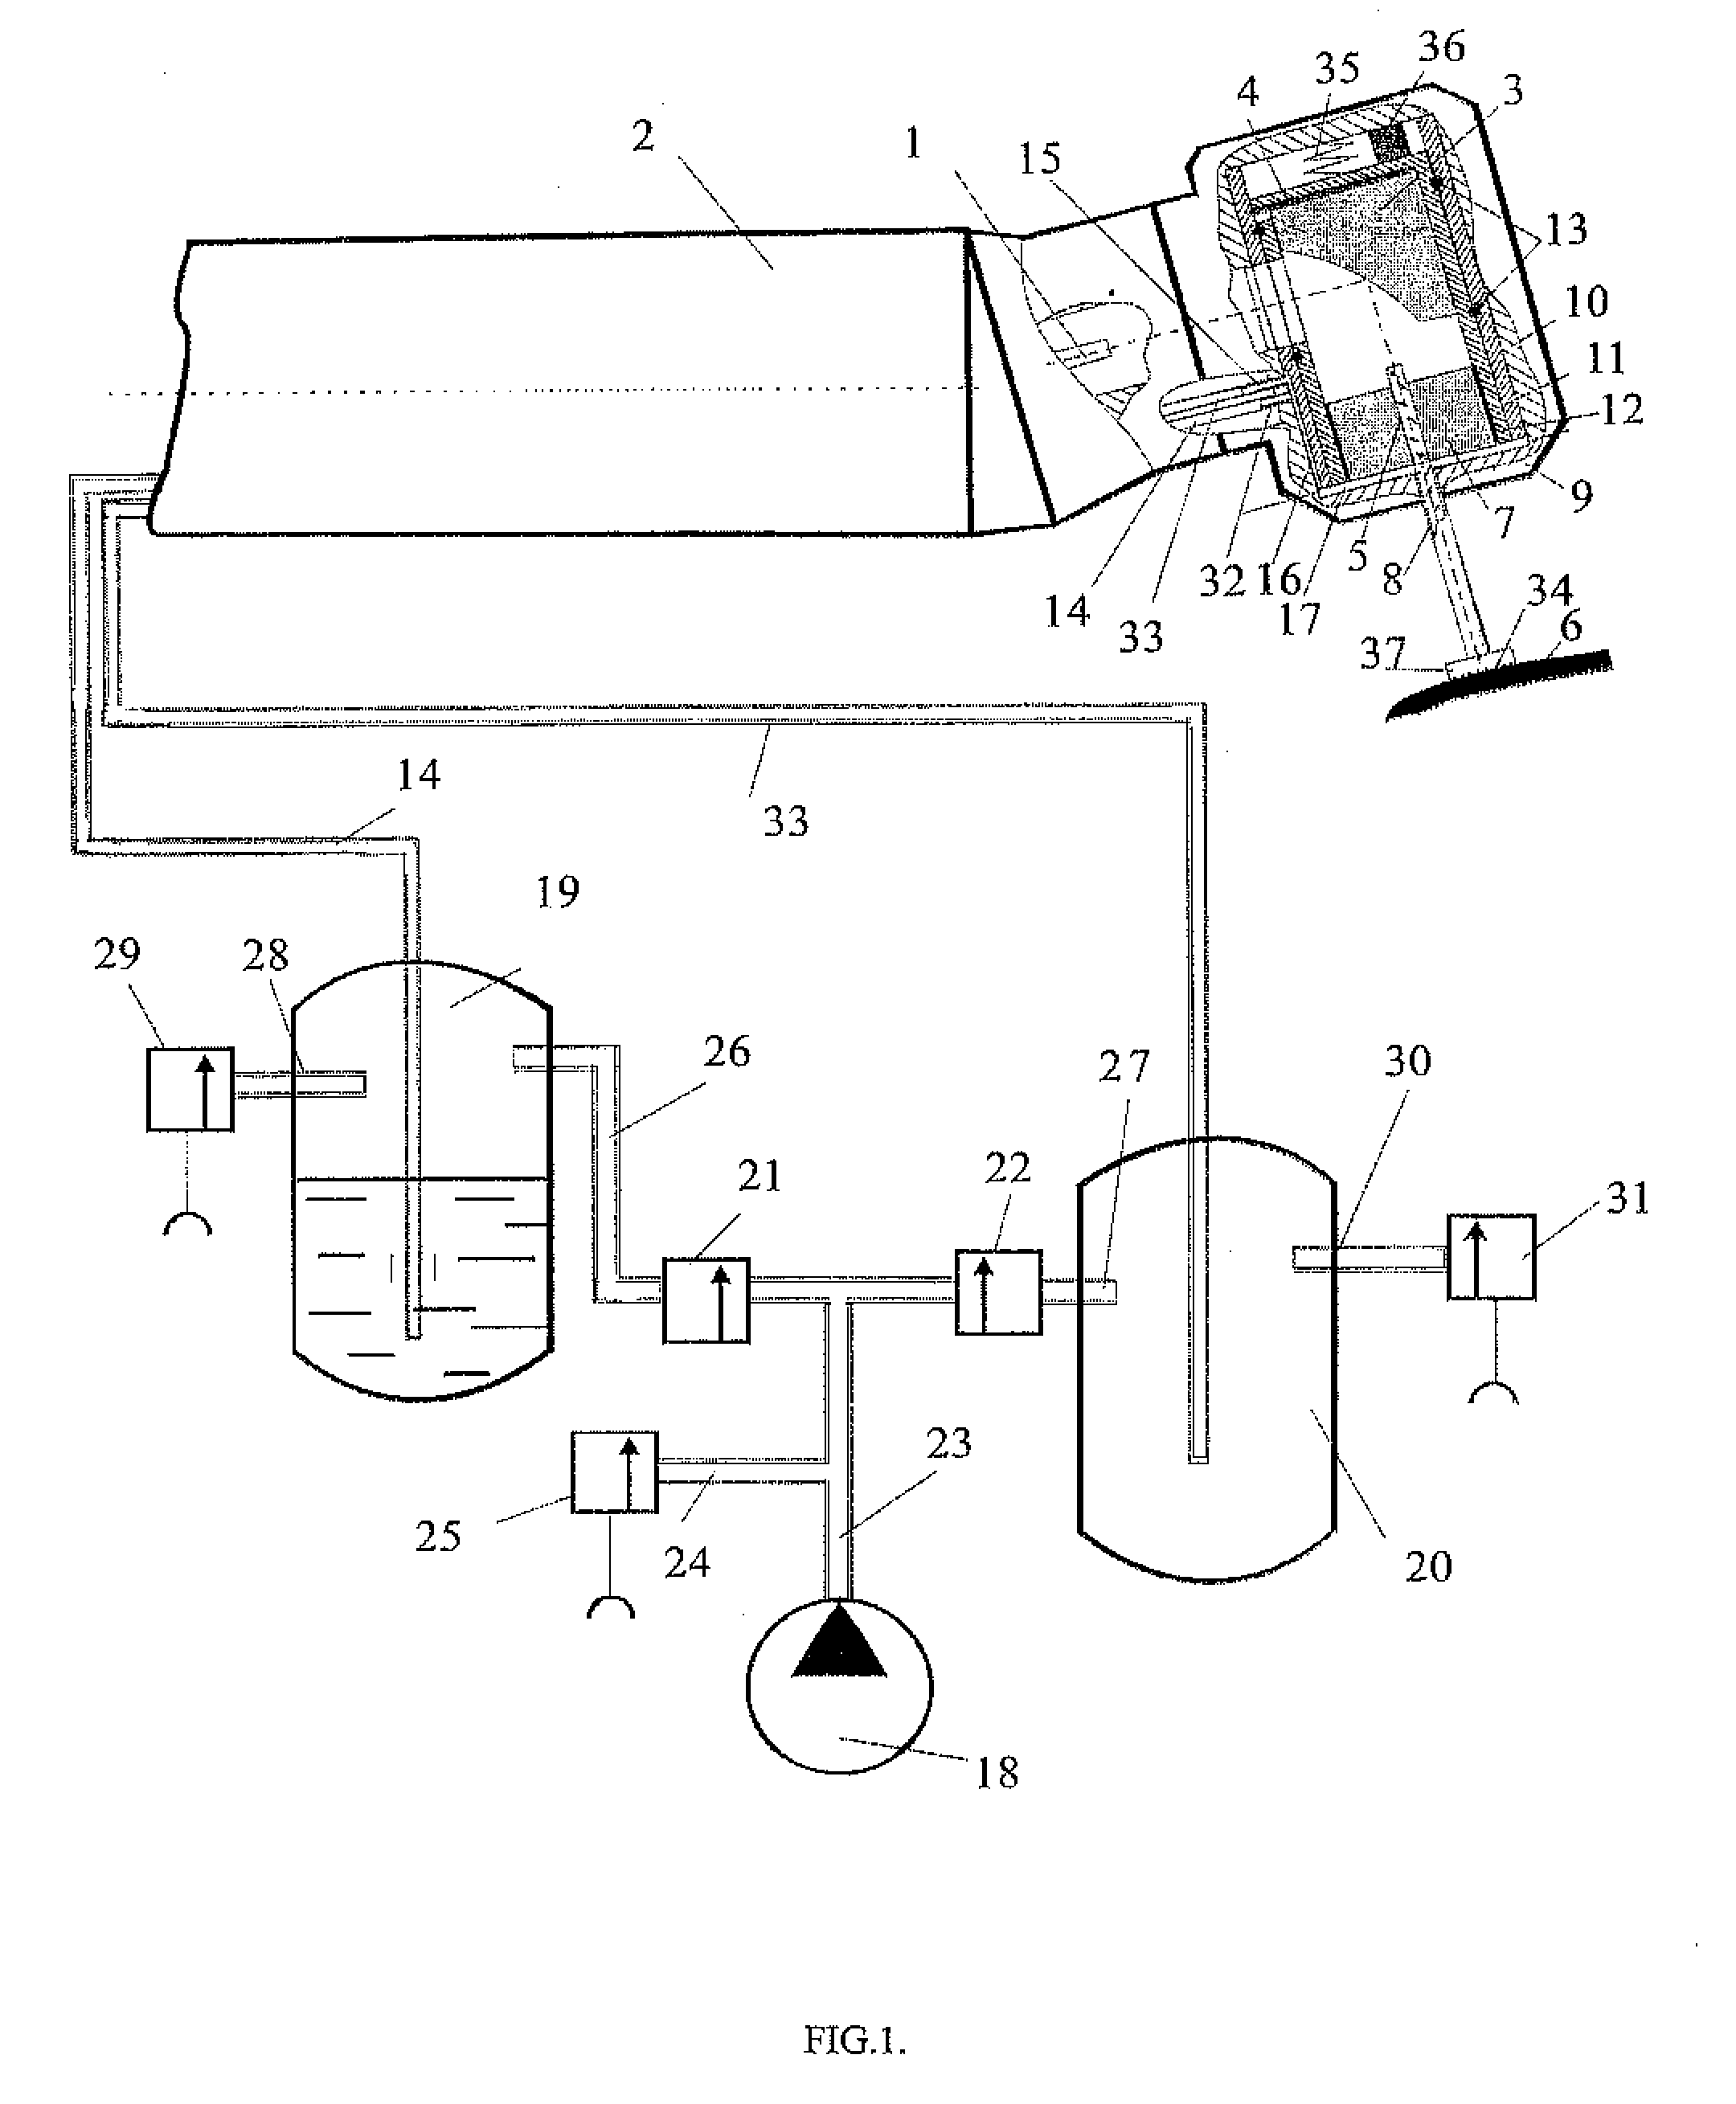 Method and apparatus for processing hard material